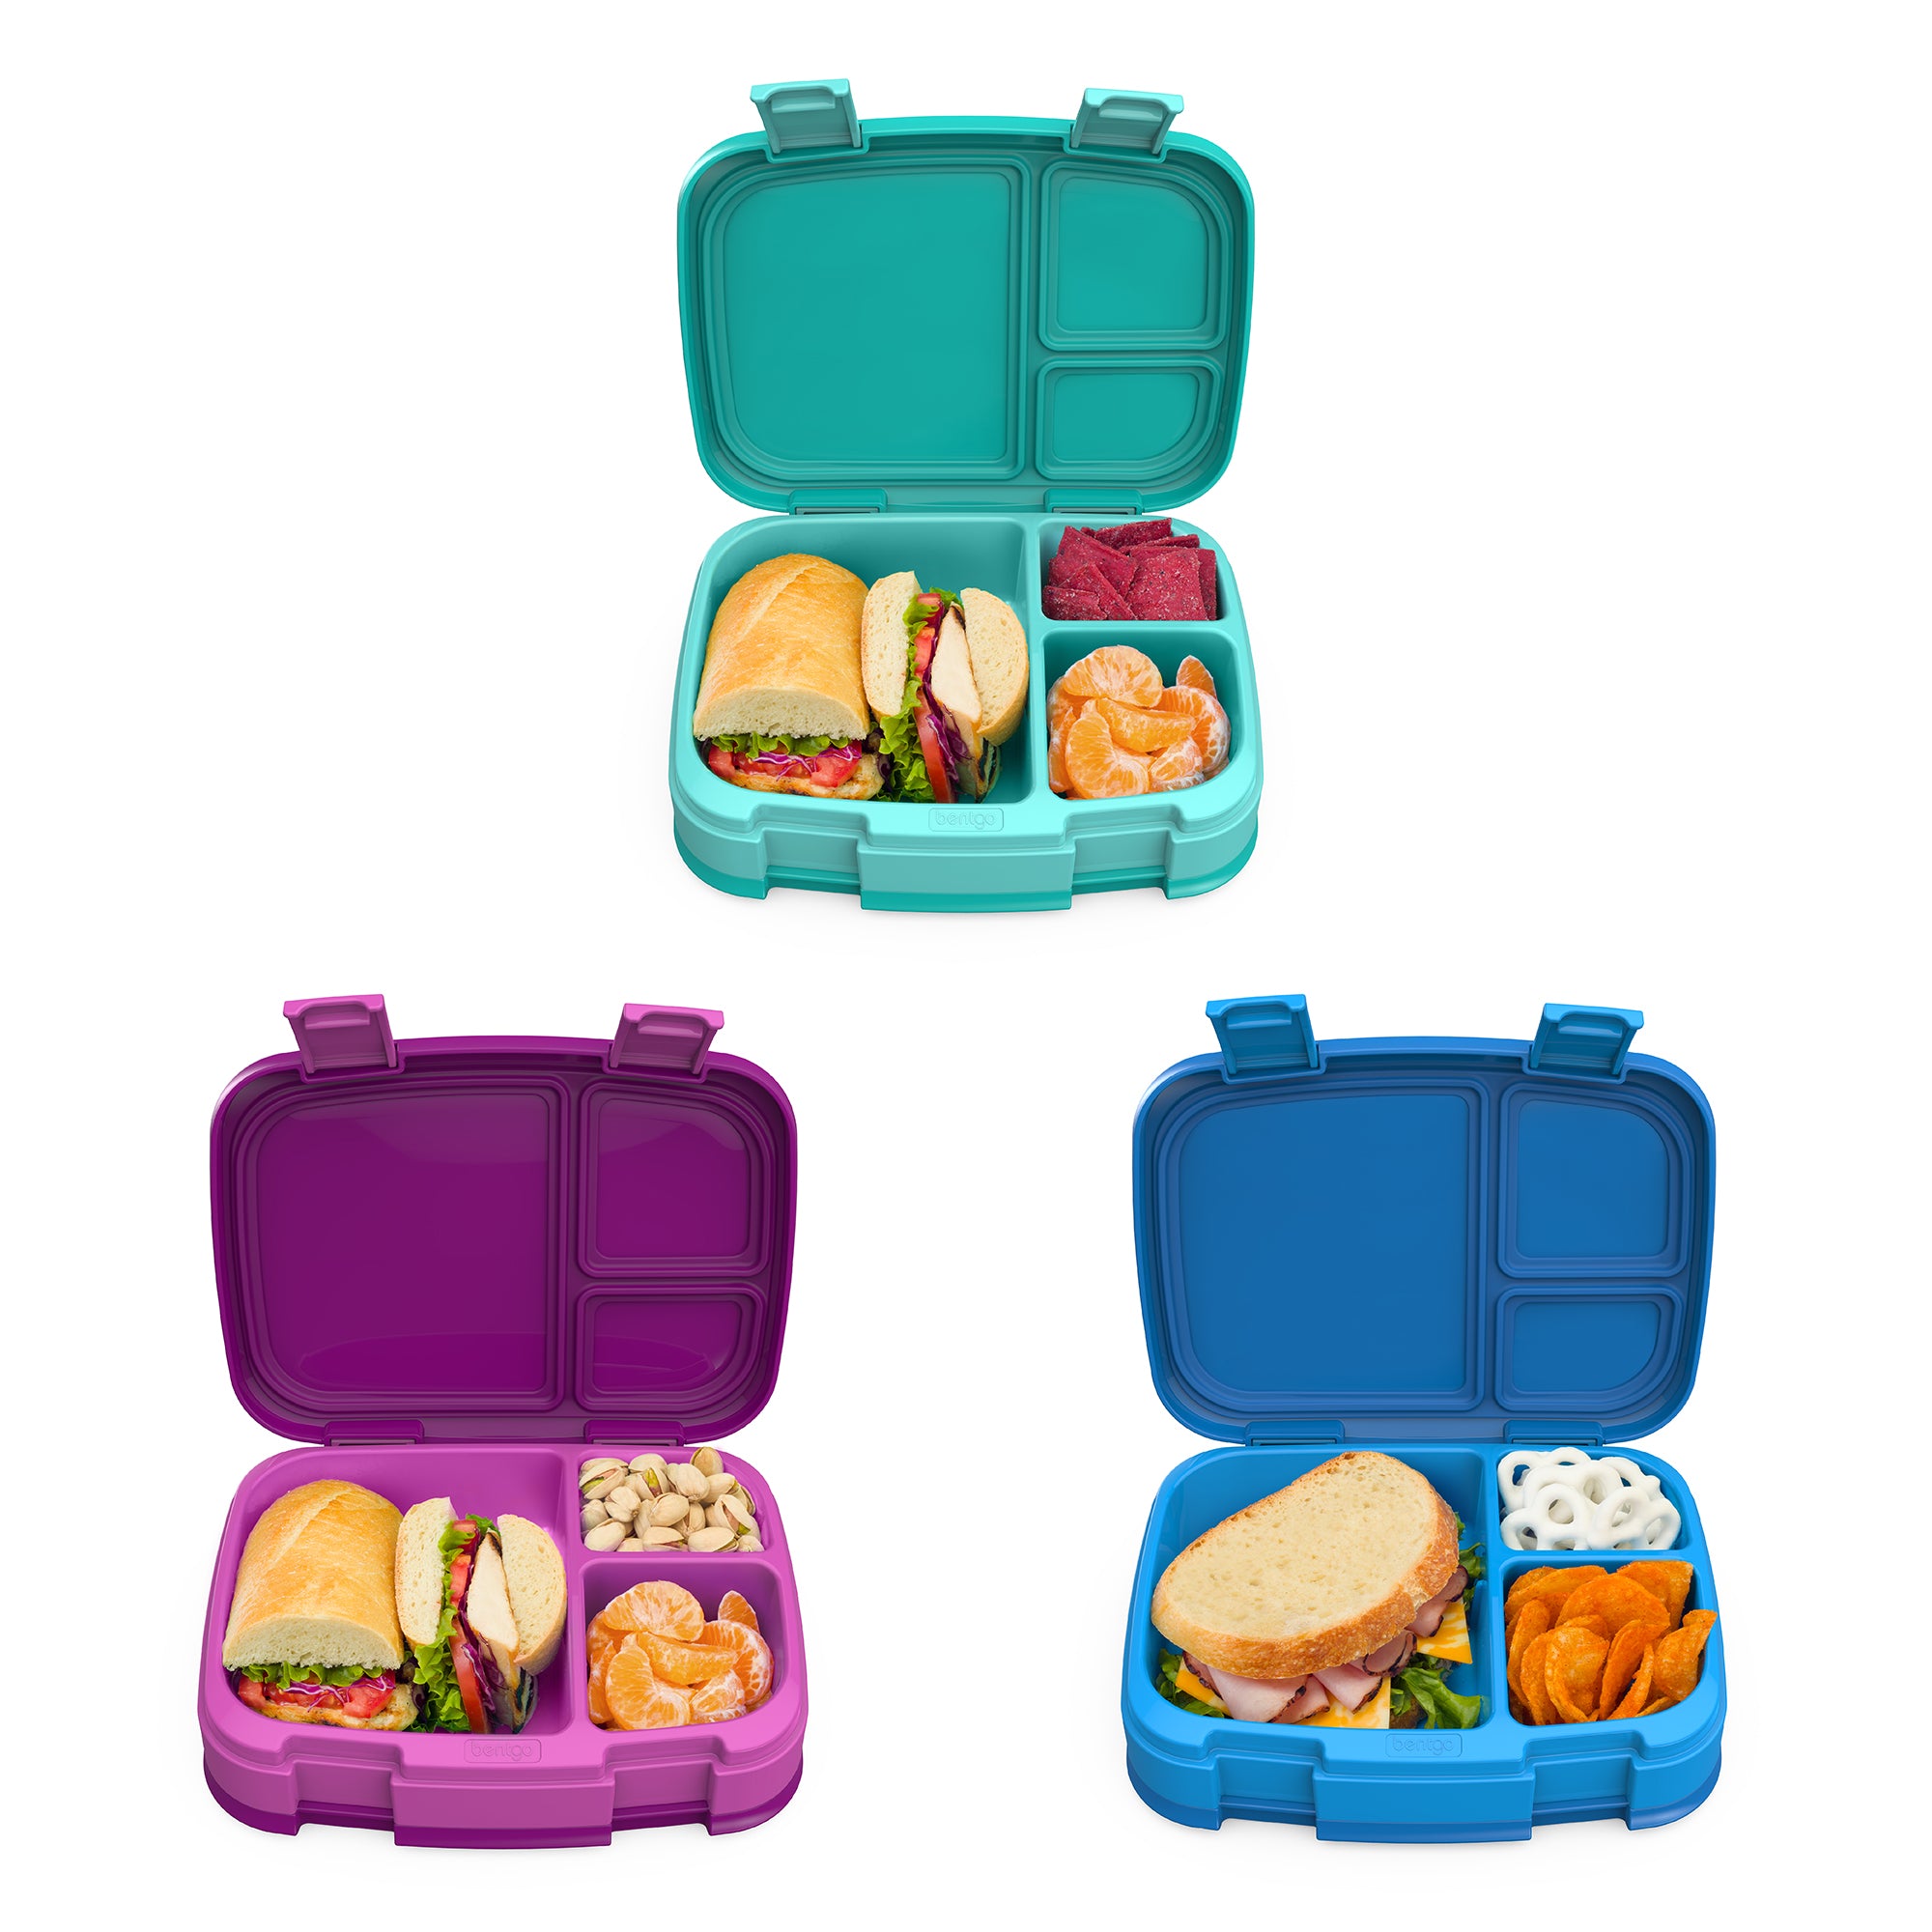 One Bentgo Fresh and One Bentgo Kids Lunch Box (Assorted Colors